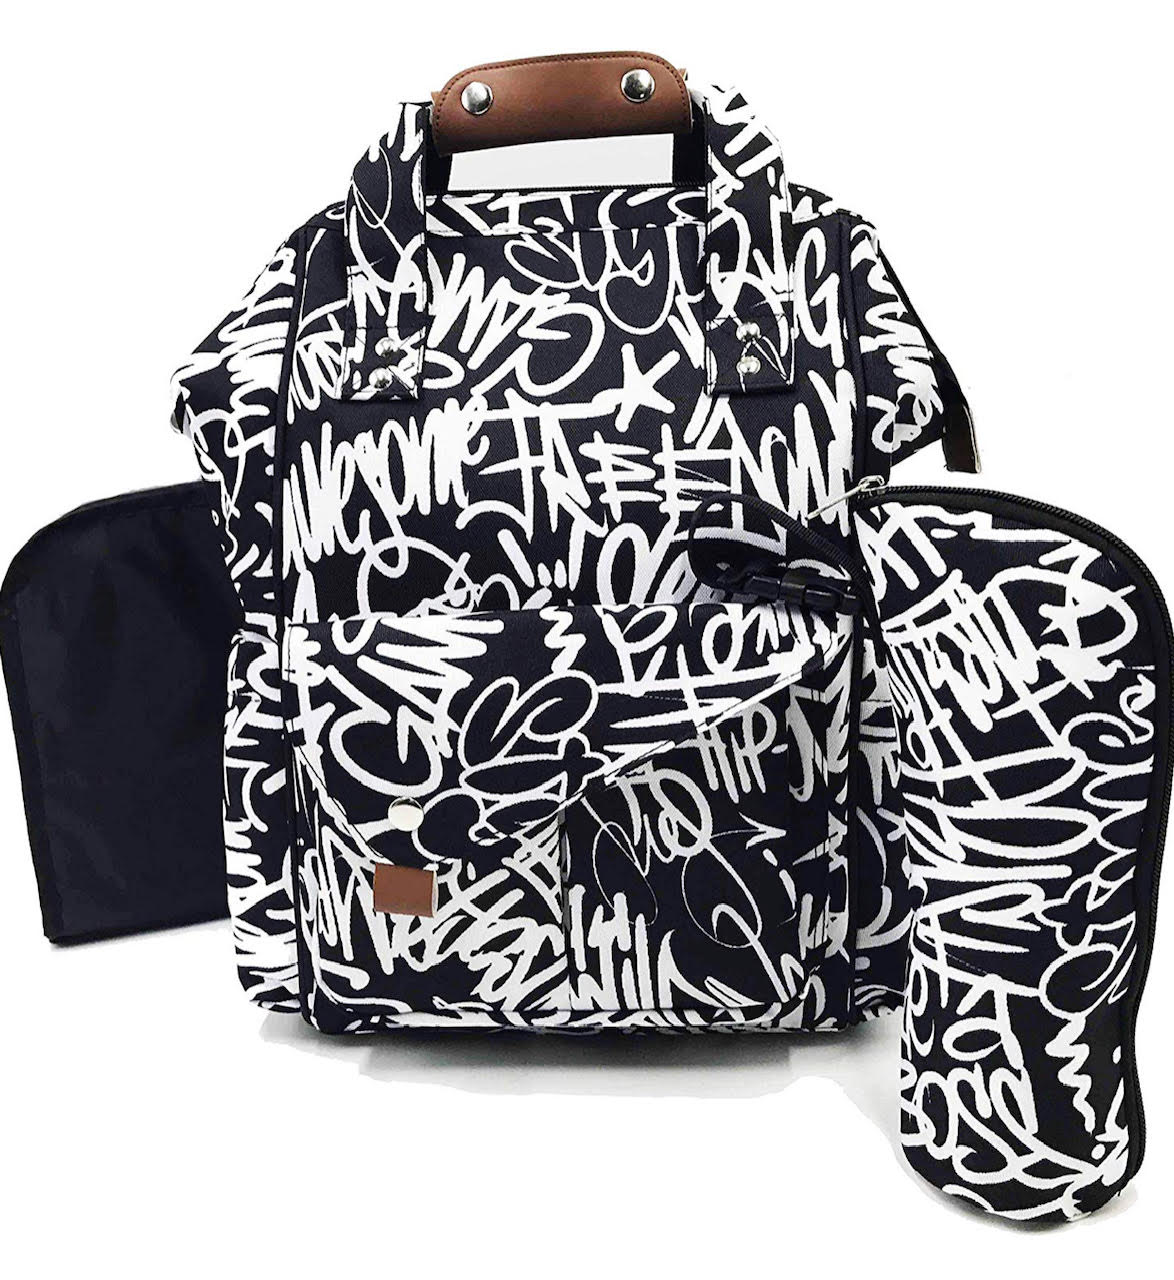 A graffiti designed black and white diaper bag for designed in a hip-hop style.